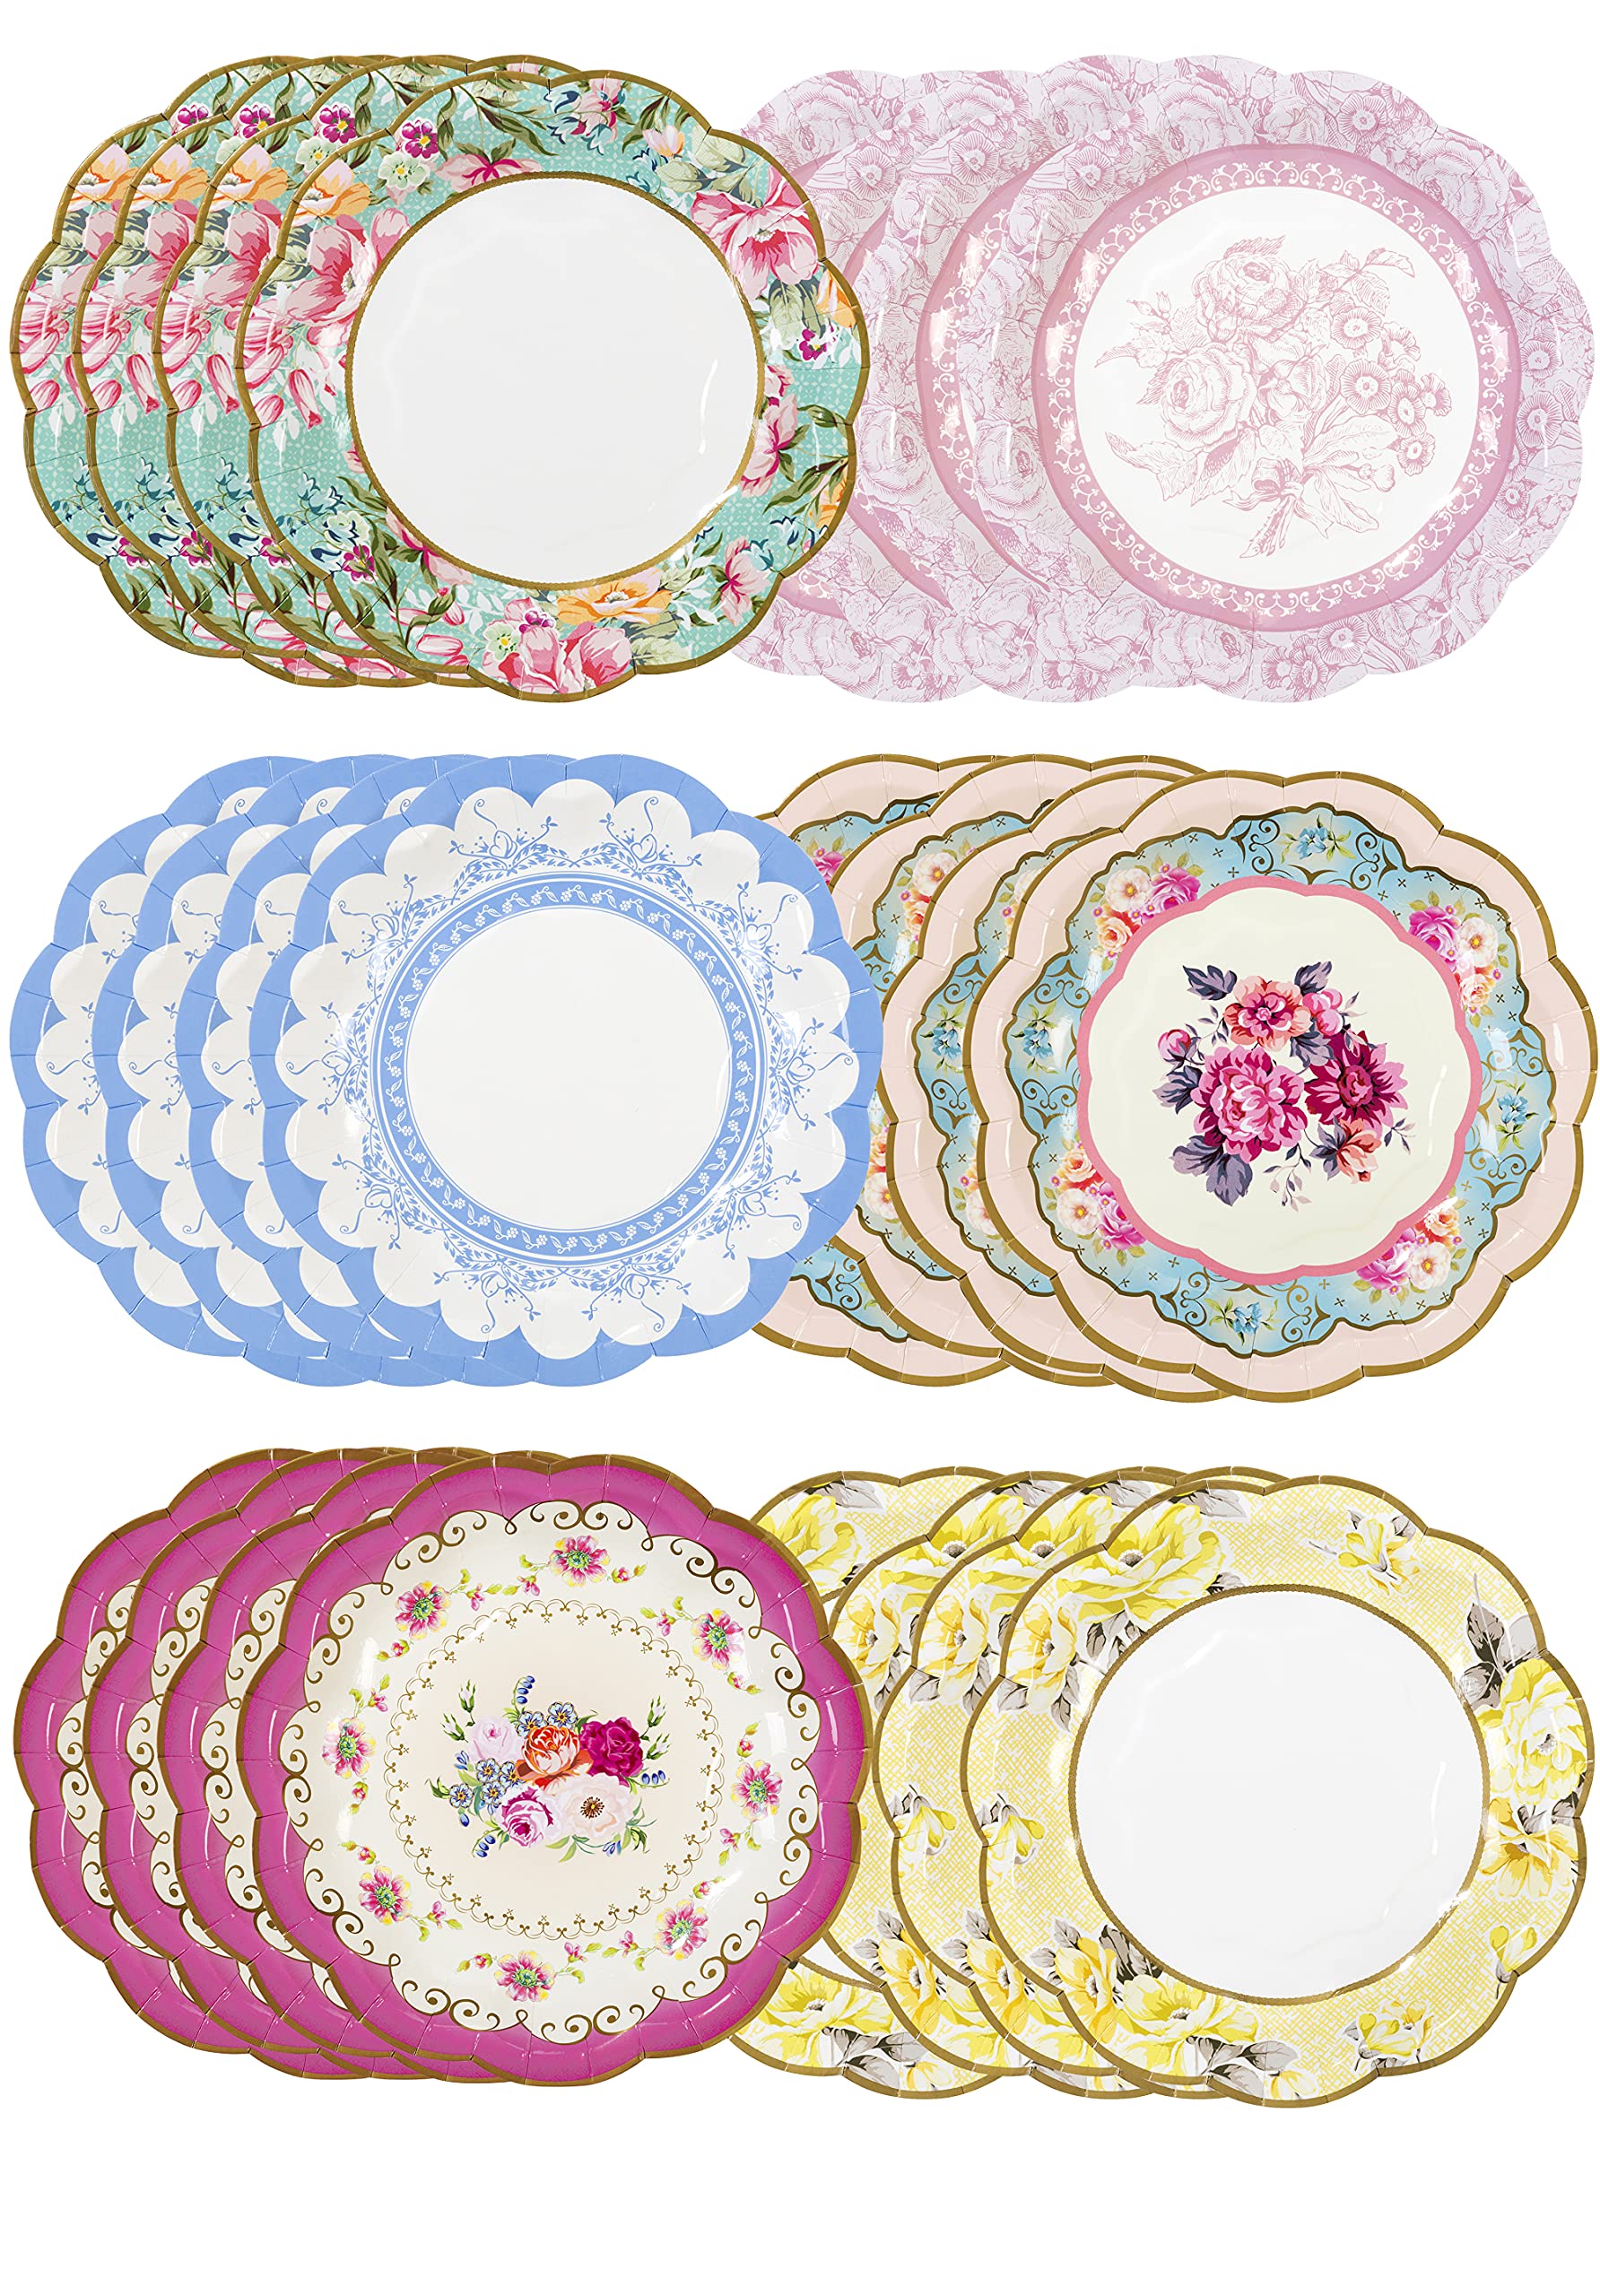 Talking Tables Pretty Floral Paper Plates | Mother's Day Afternoon Tea Party Decorations Truly Scrumptious Disposable Dishes For Birthday Baby Shower, Bridal Wedding, Made UK, Pretty, Pack of 24